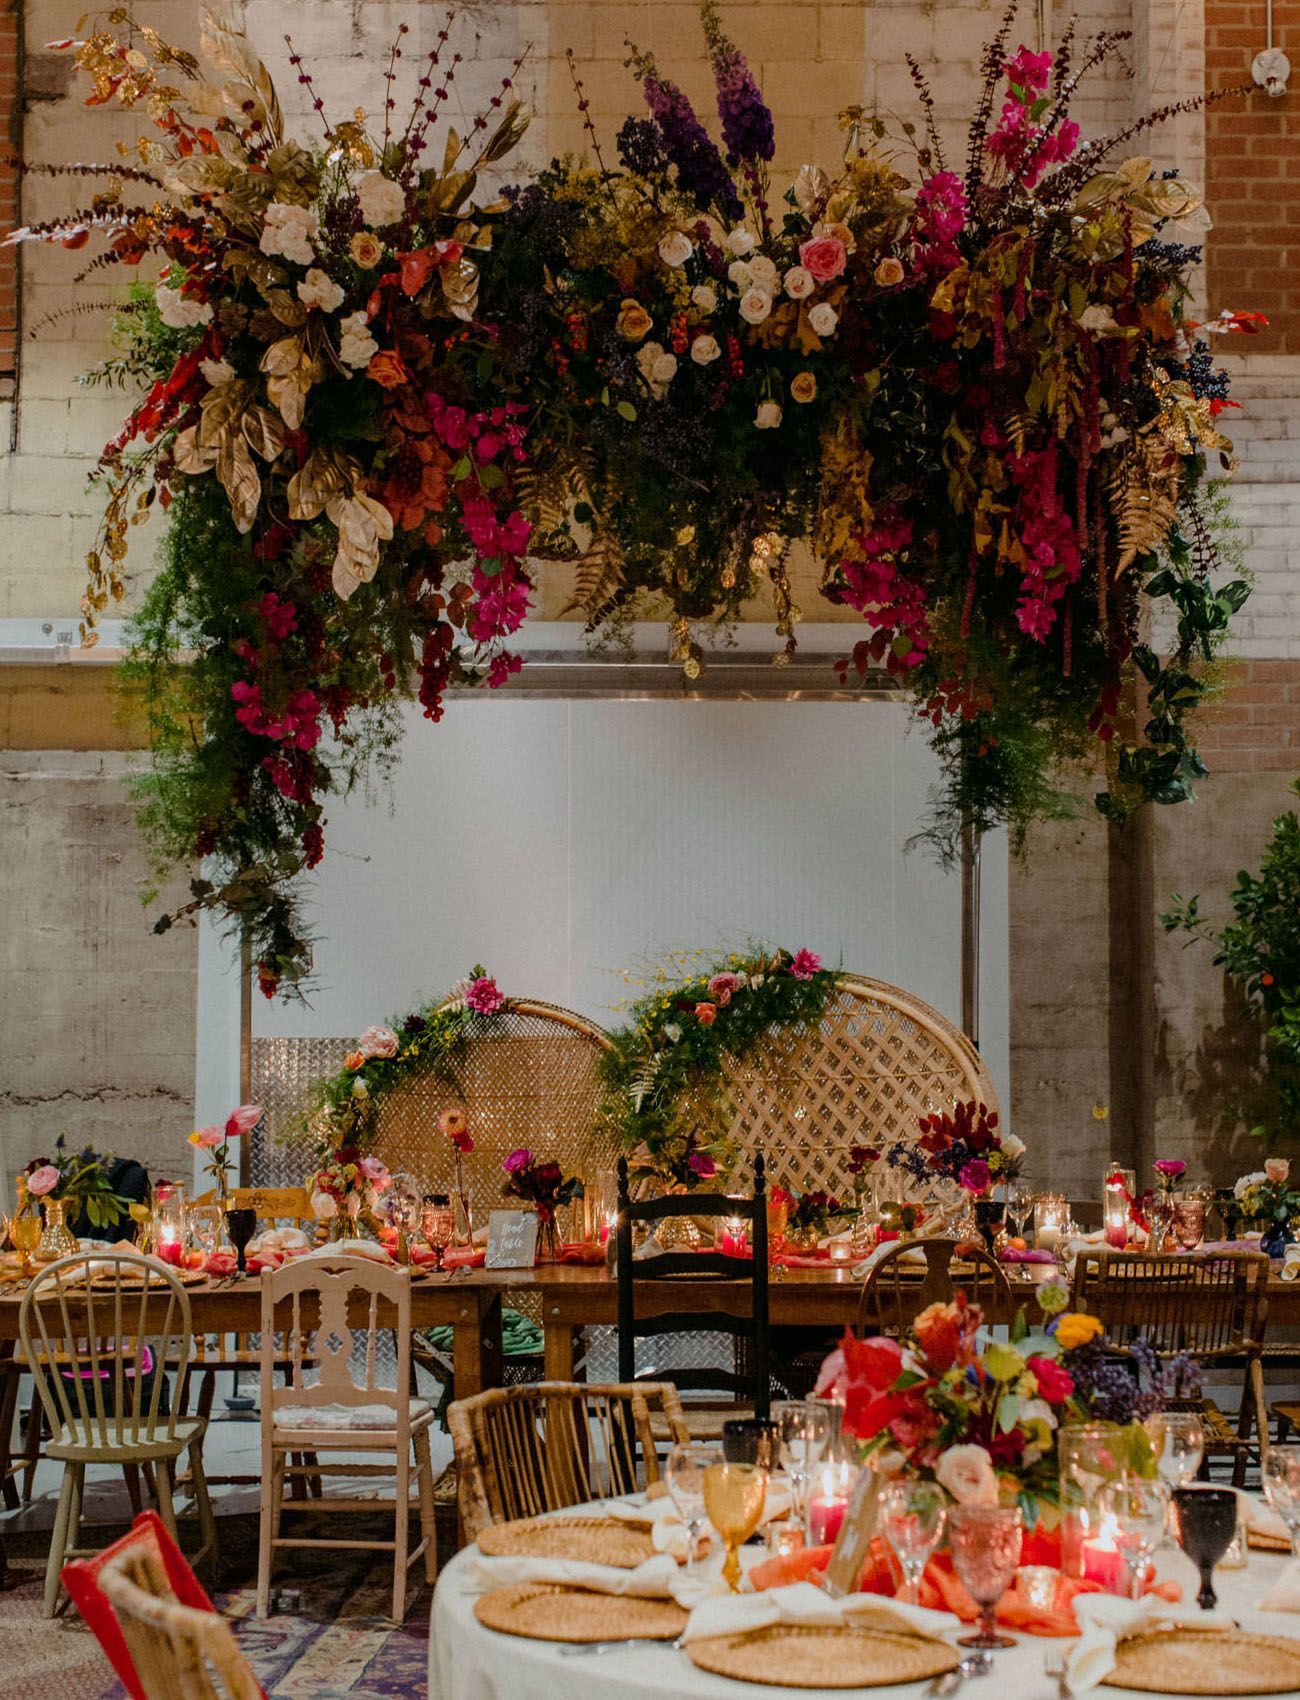 Eclectic + Colorful Urban Indian Wedding at a Craft Brewery! - Green Wedding Shoes -   15 wedding Indian culture ideas